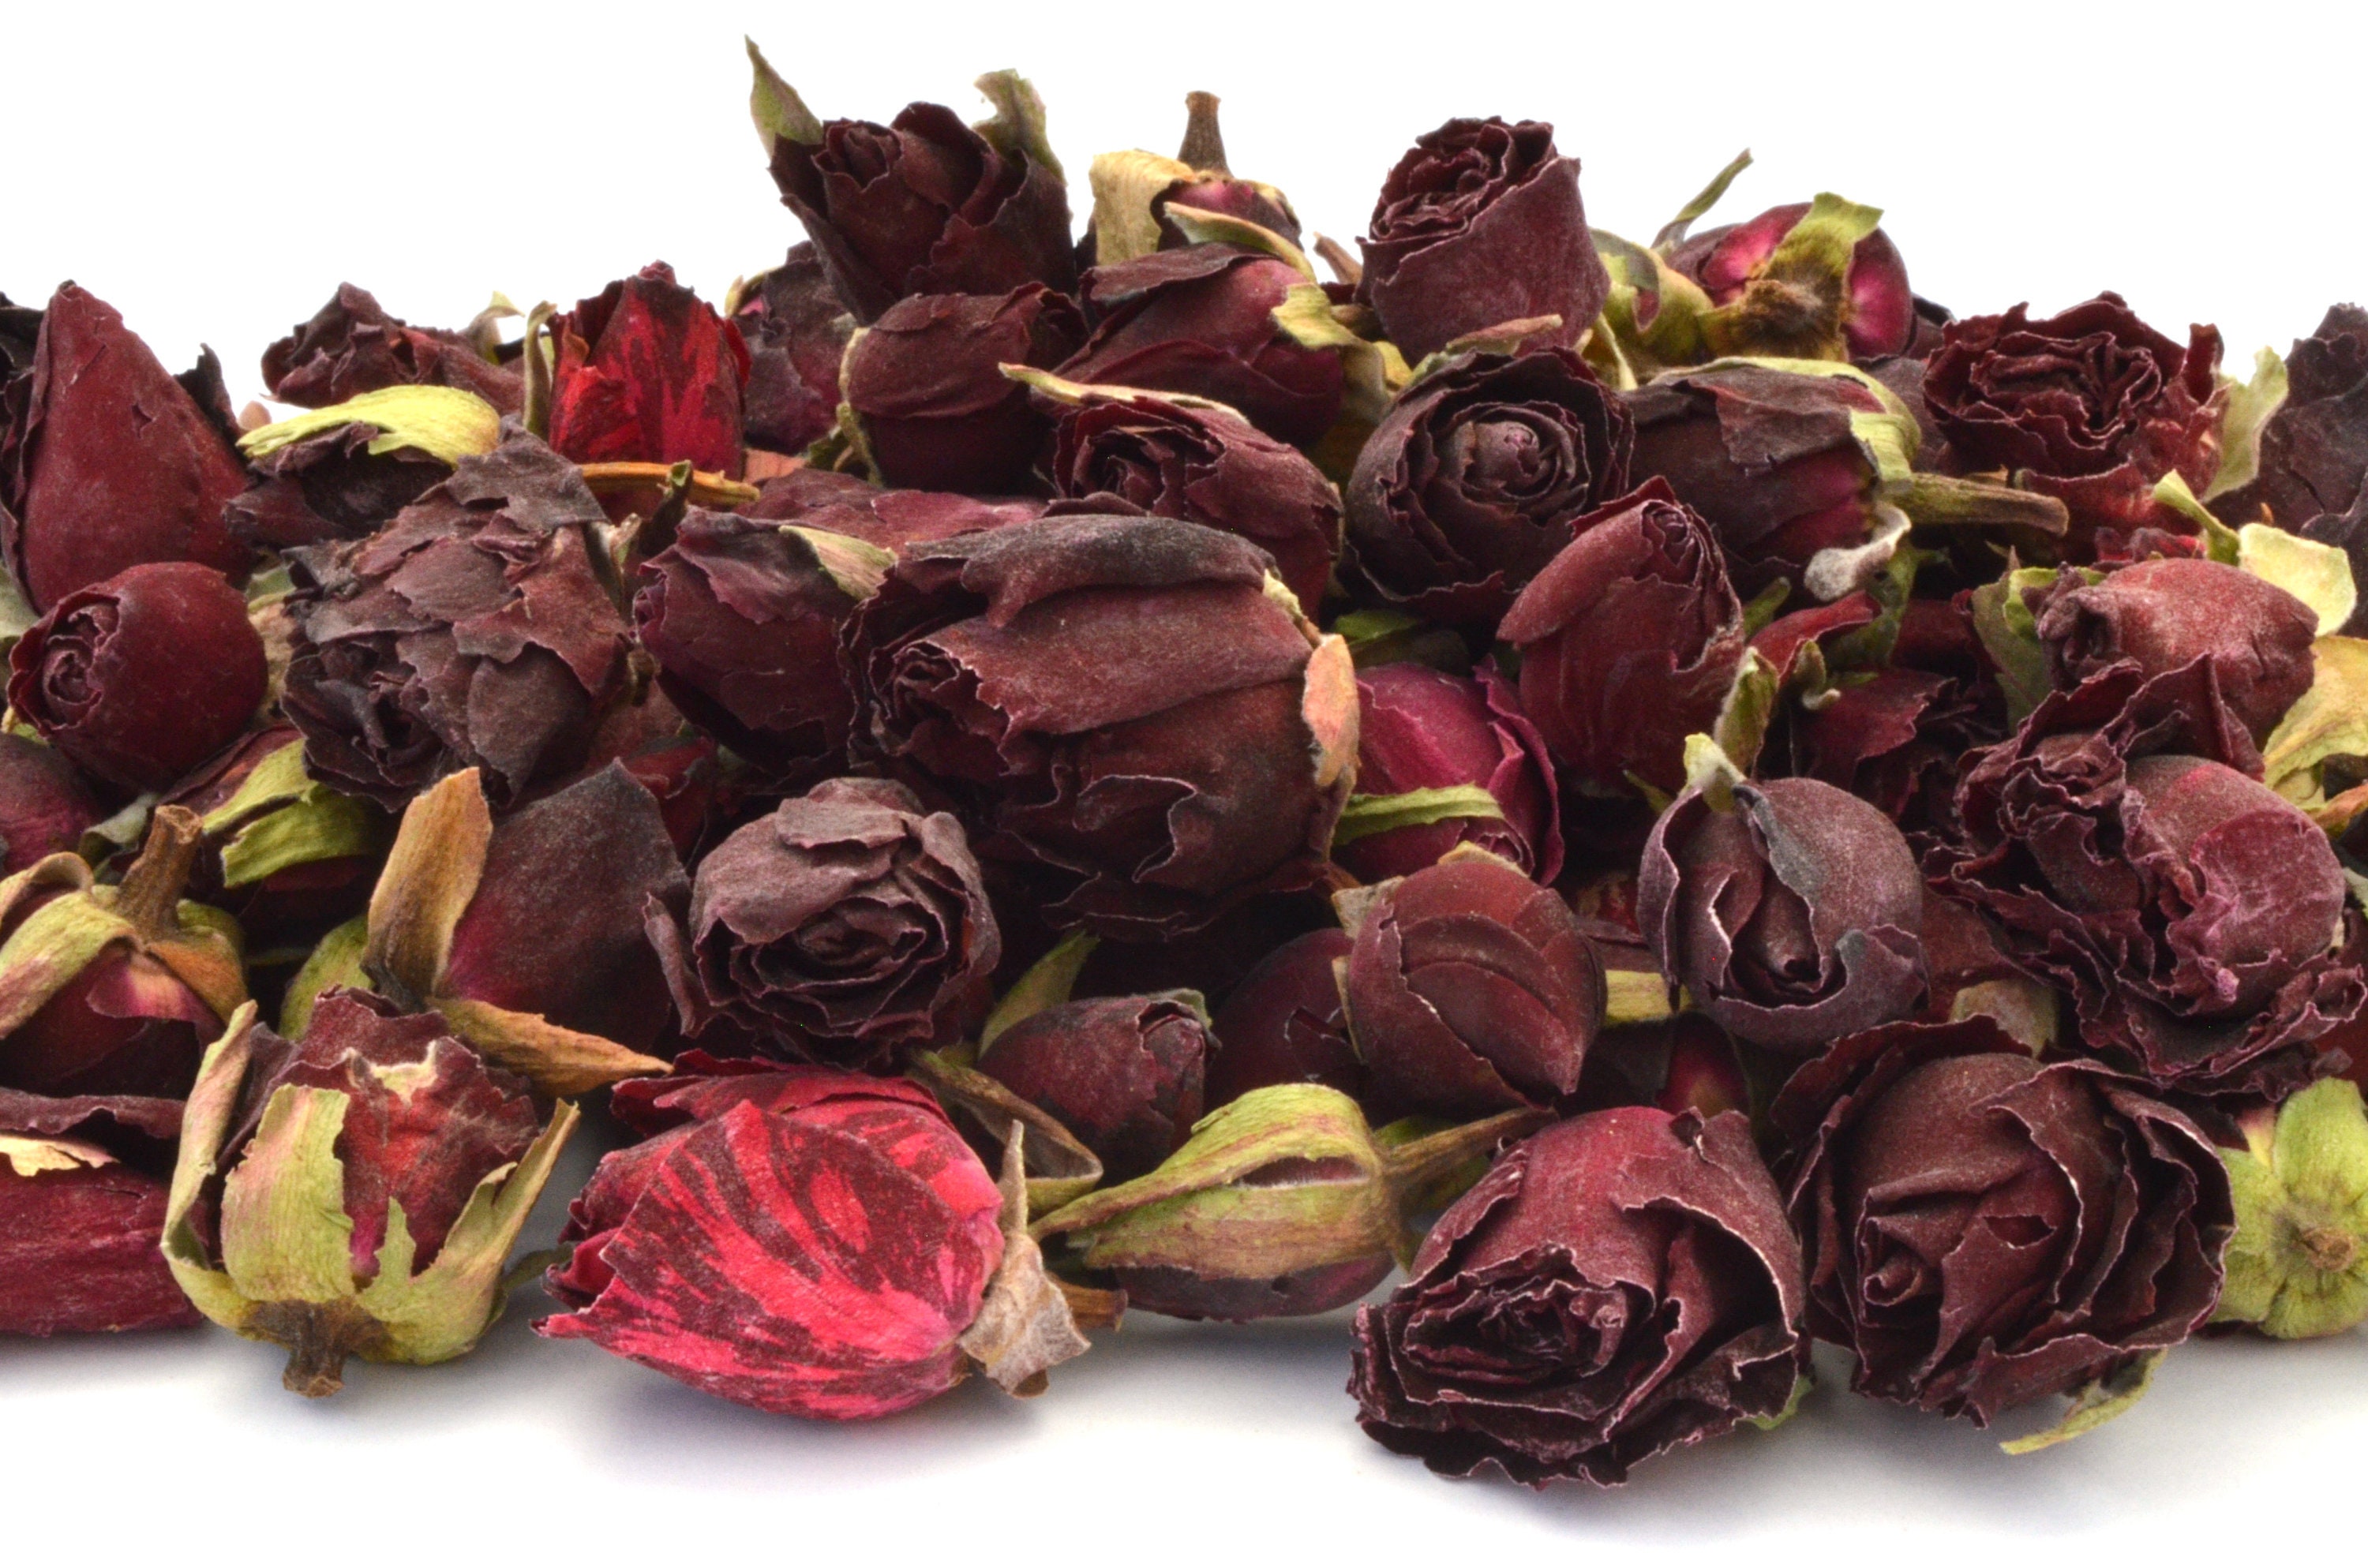 Rose Buds 50G Whole Dried Rose Buds DARK PINK Premium Natural Dried  Flowers, Rose Petal CRAFT Tea Soap Oil Cosmetic Supply 